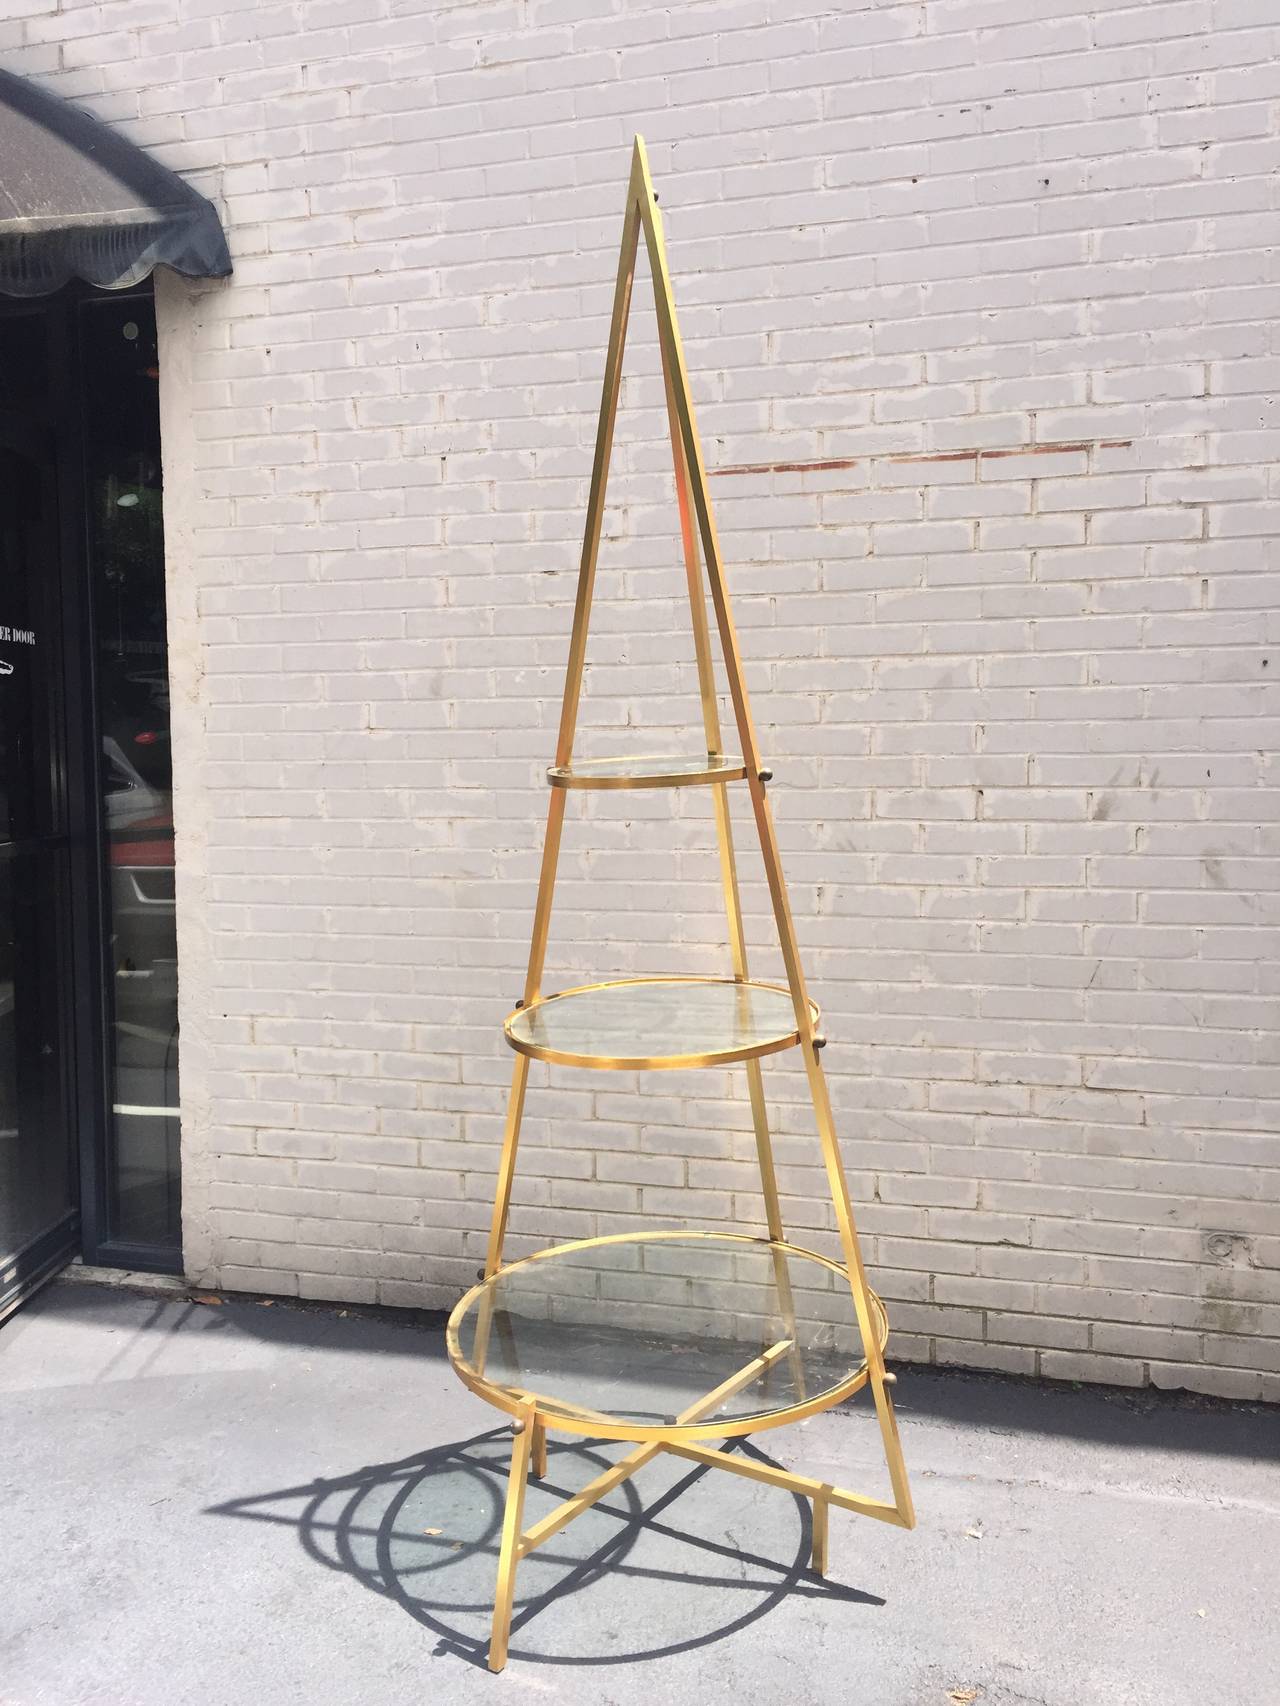 Exceptional Mid-Century sculptural pyramid etagere display shelf. This unique design in comprised of a brass tone aluminum frame with three glass shelves. Very solid and well made great for displaying your favorite objects.